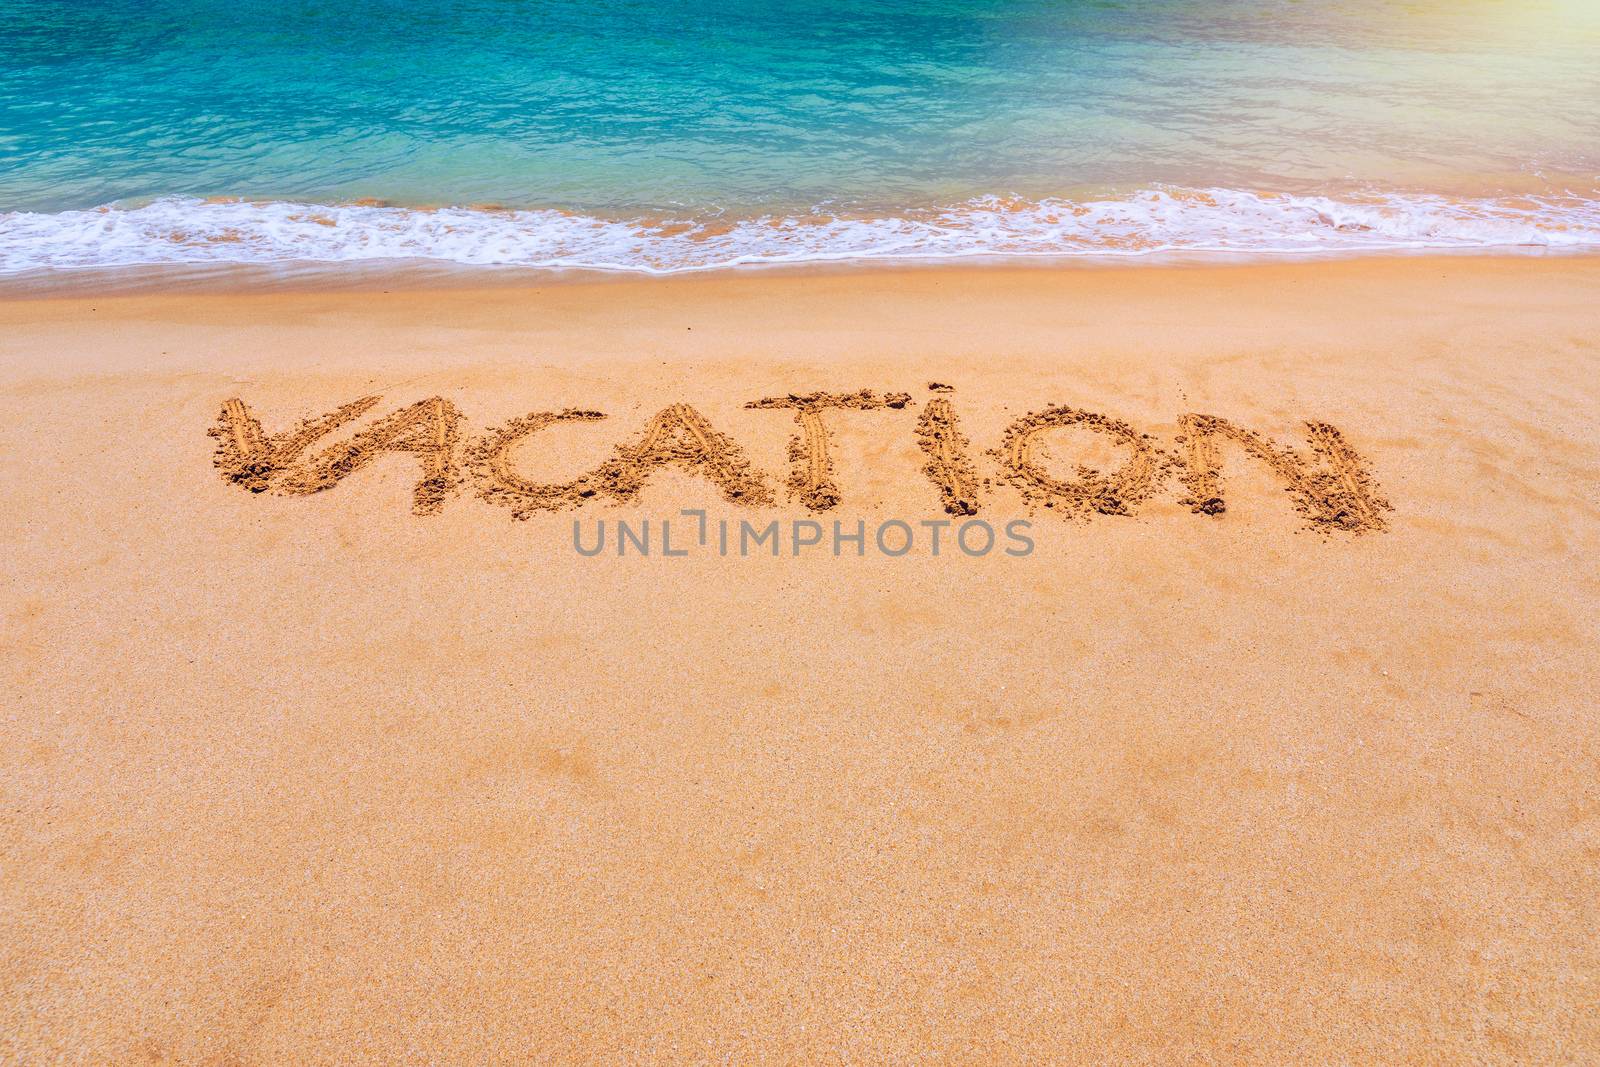 Vacation text on a beach. Vacation written in a sandy tropical beach. "Vacation" written in the sand on the beach blue waves in the background. Vacation on the sand beach concept.